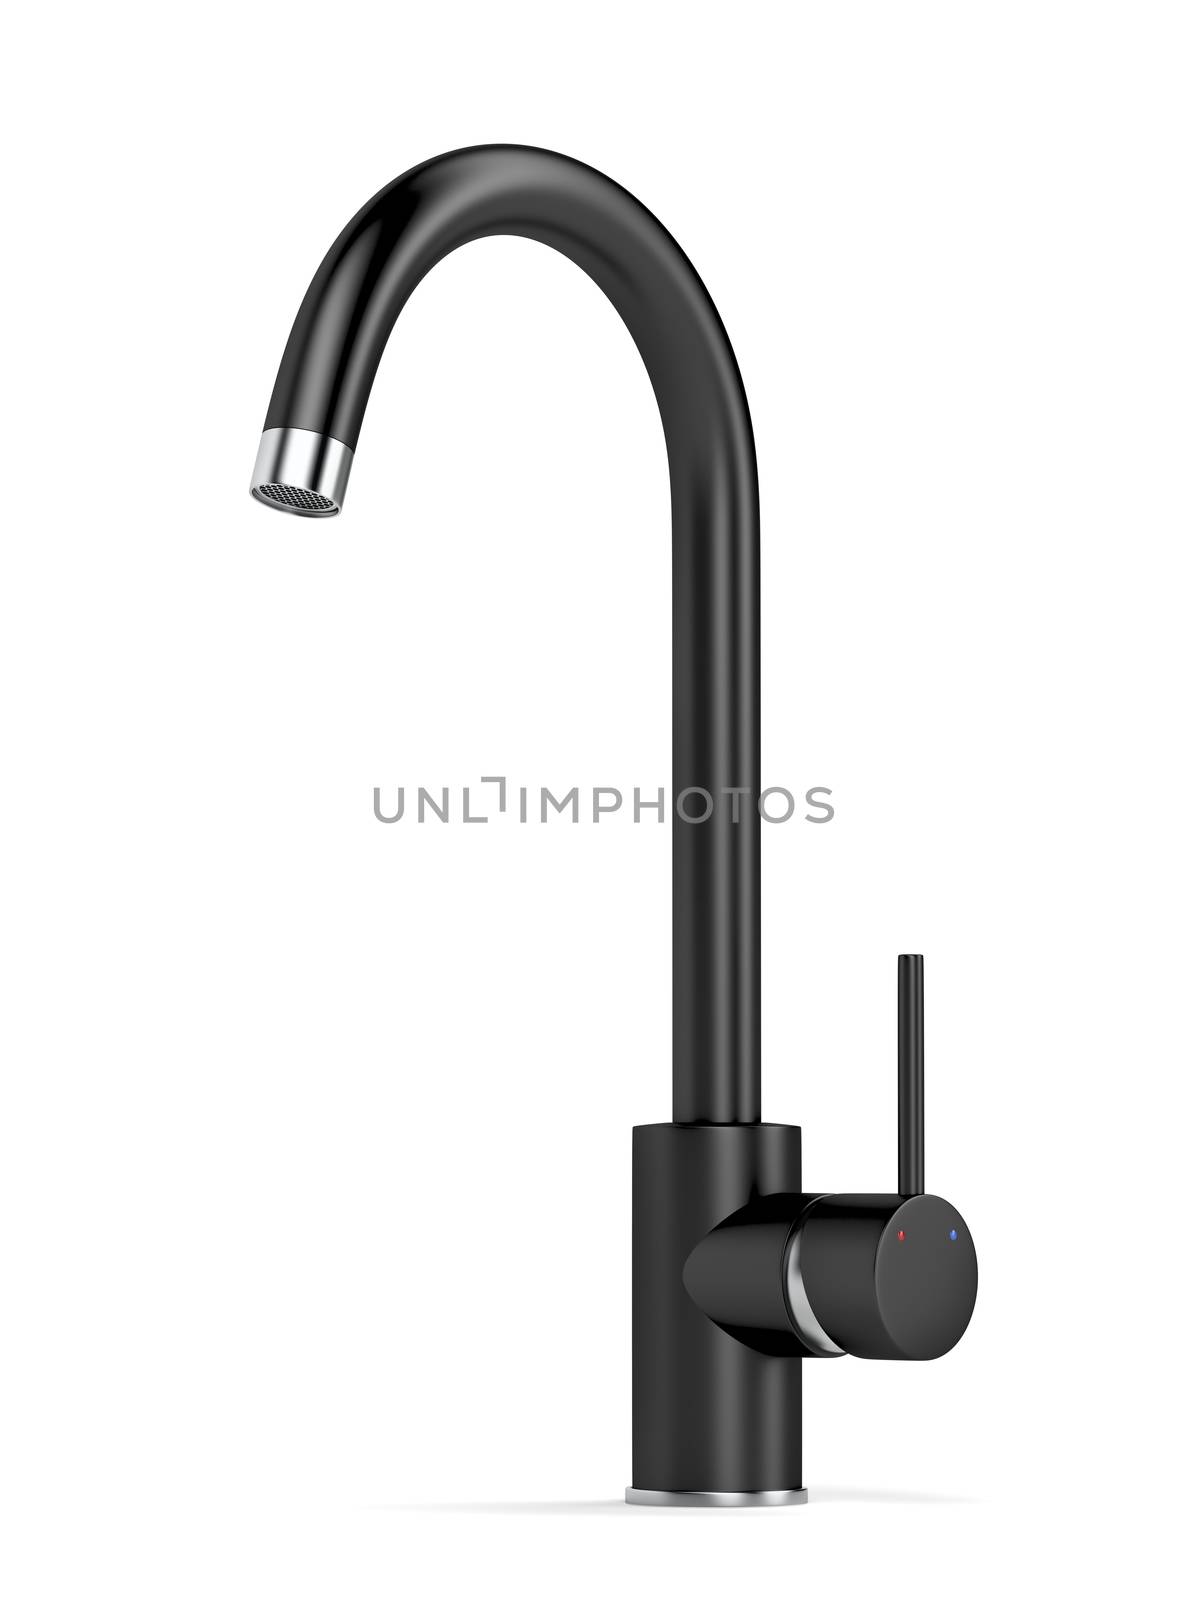 Black kitchen faucet by magraphics